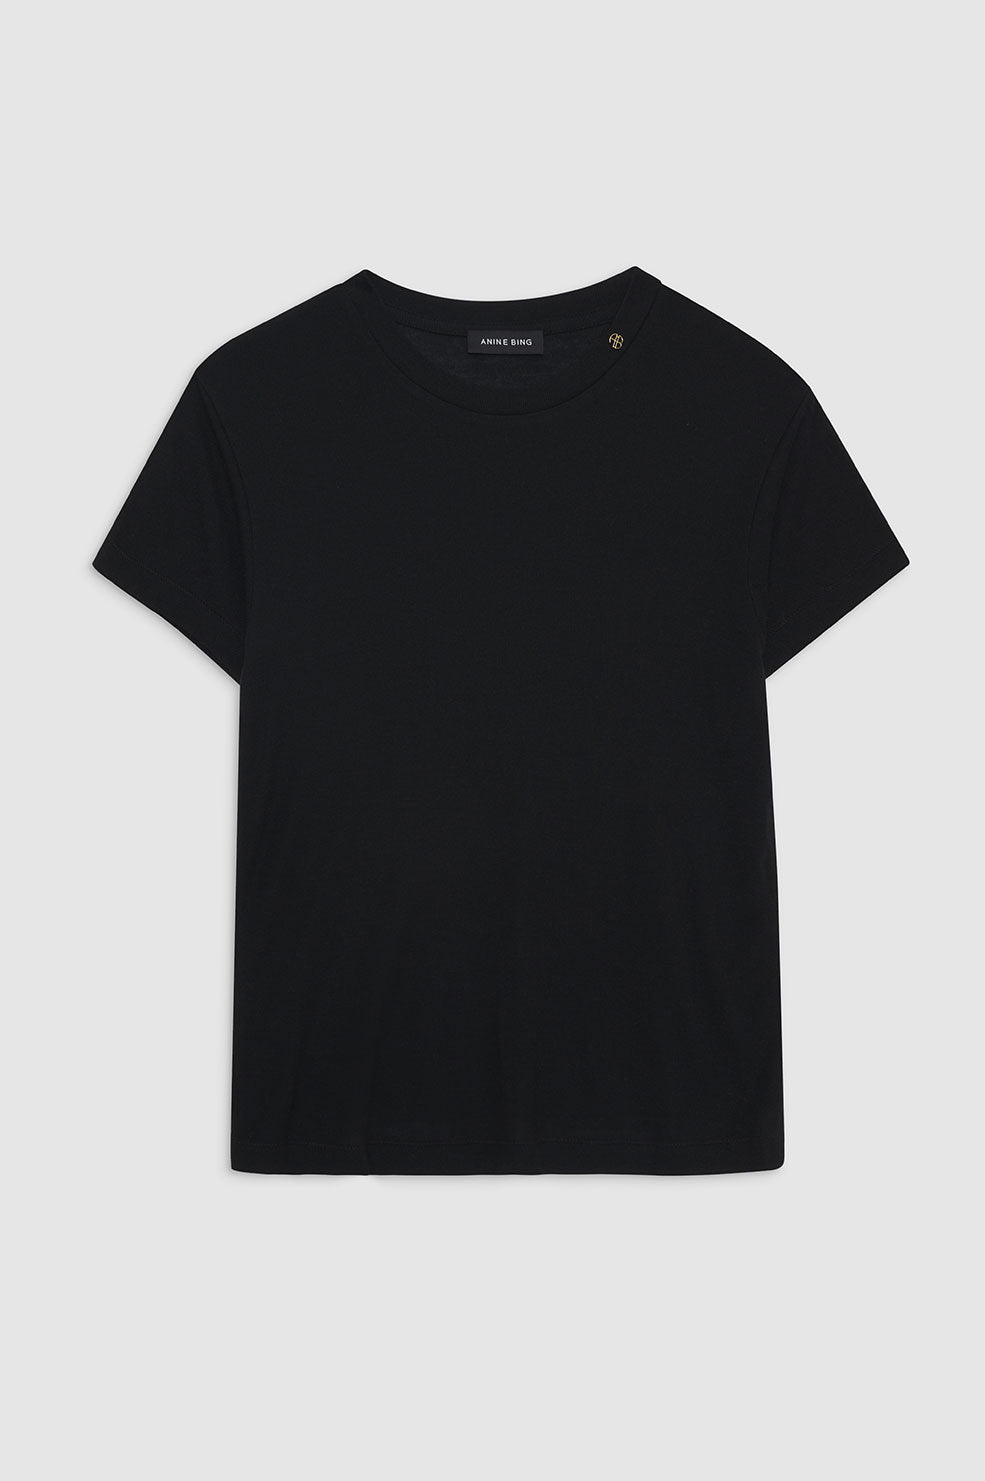 ANINE BING Amani Tee - Black Cashmere Blend - Front View